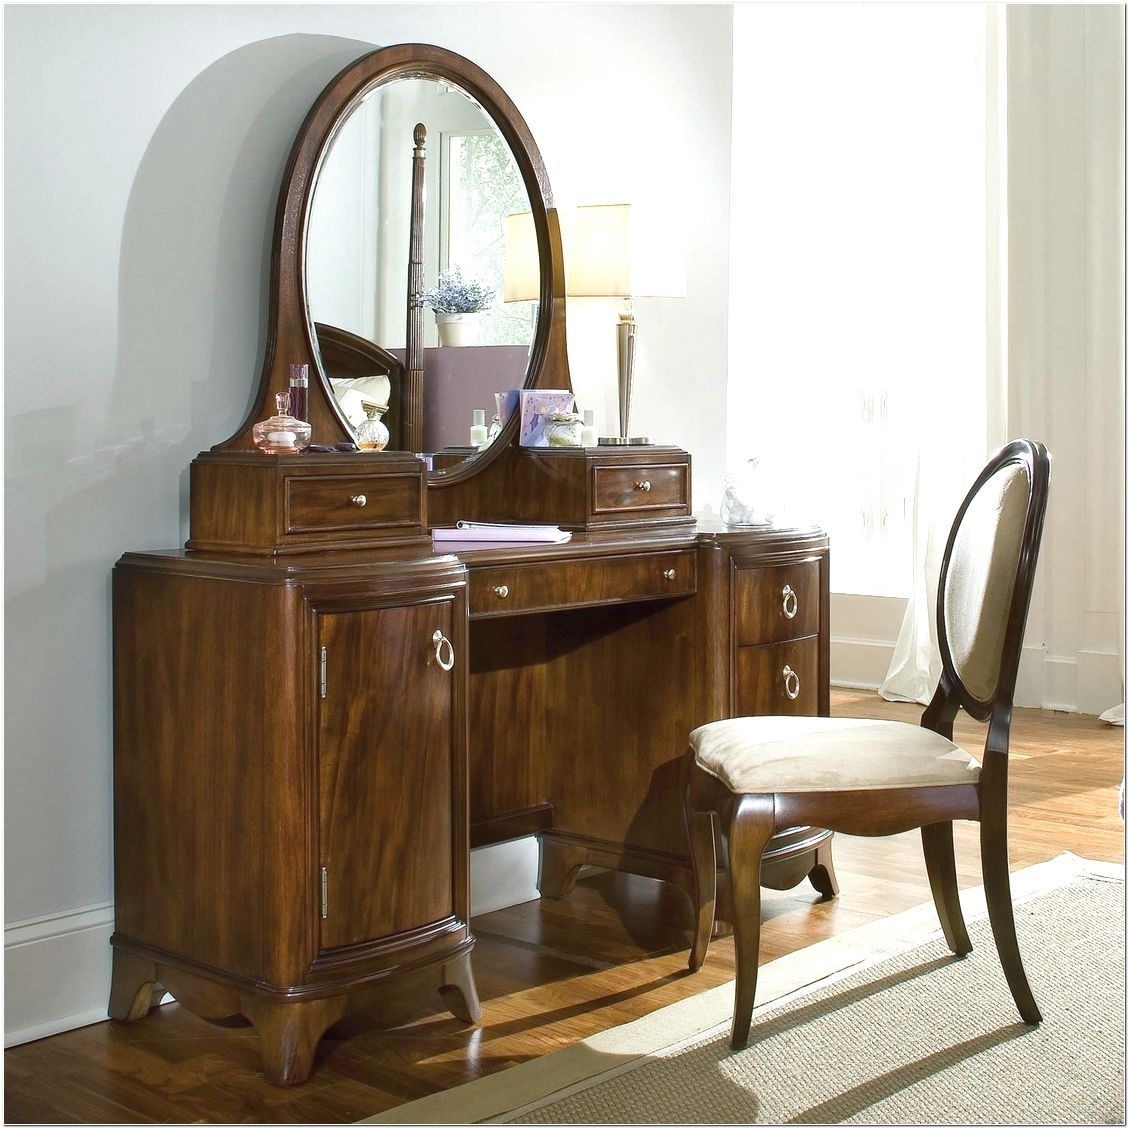 Antique Pine Dressing Table Mirror Design Ideas Interior Design With Decorative Dressing Table Mirrors (View 10 of 15)